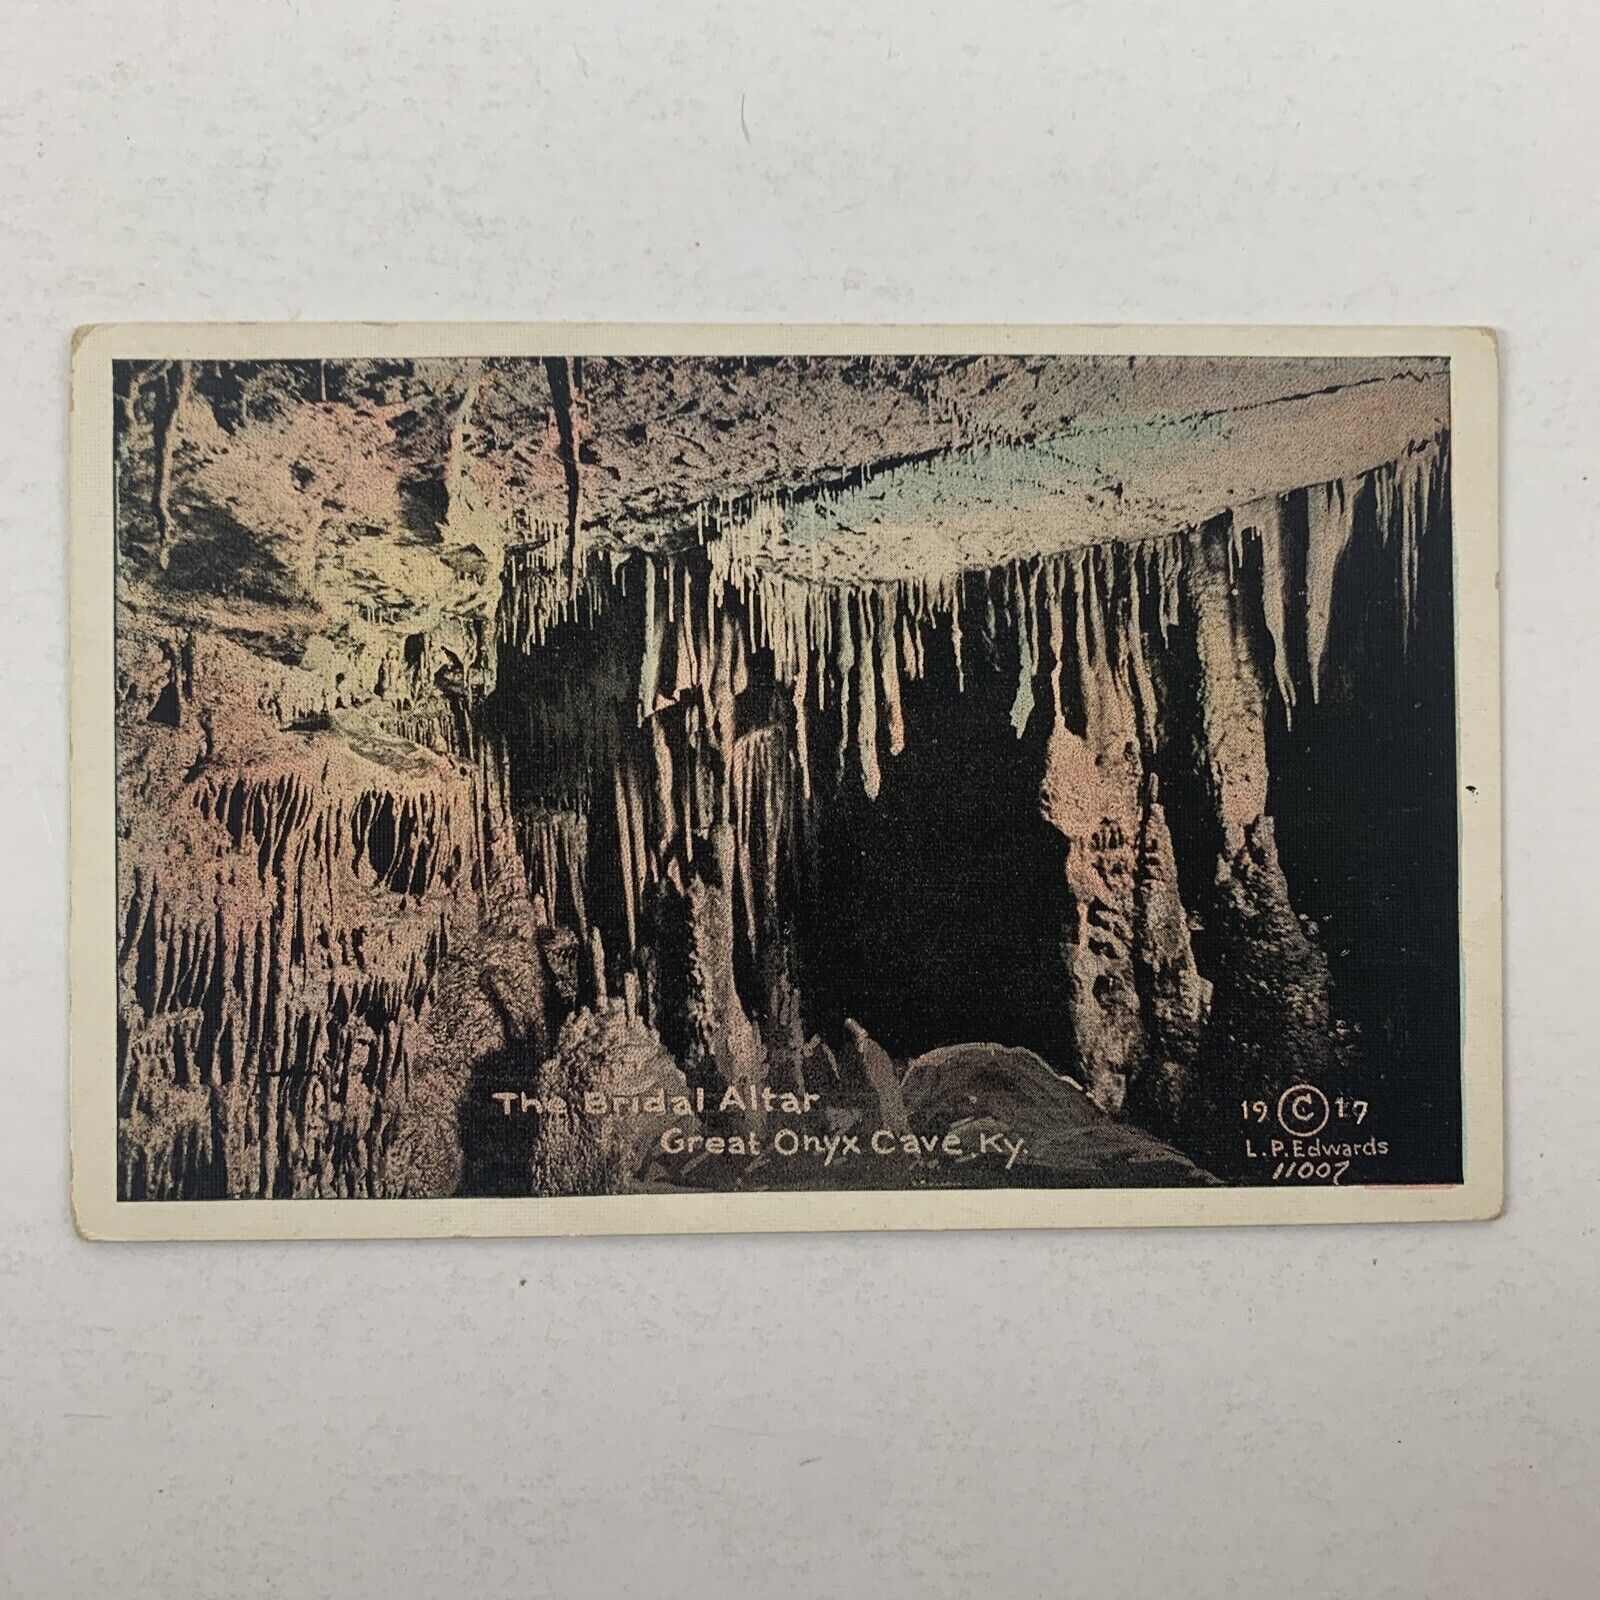 Postcard Kentucky Great Onyx Cave KY Bridal Altar 1917 Posted White Border